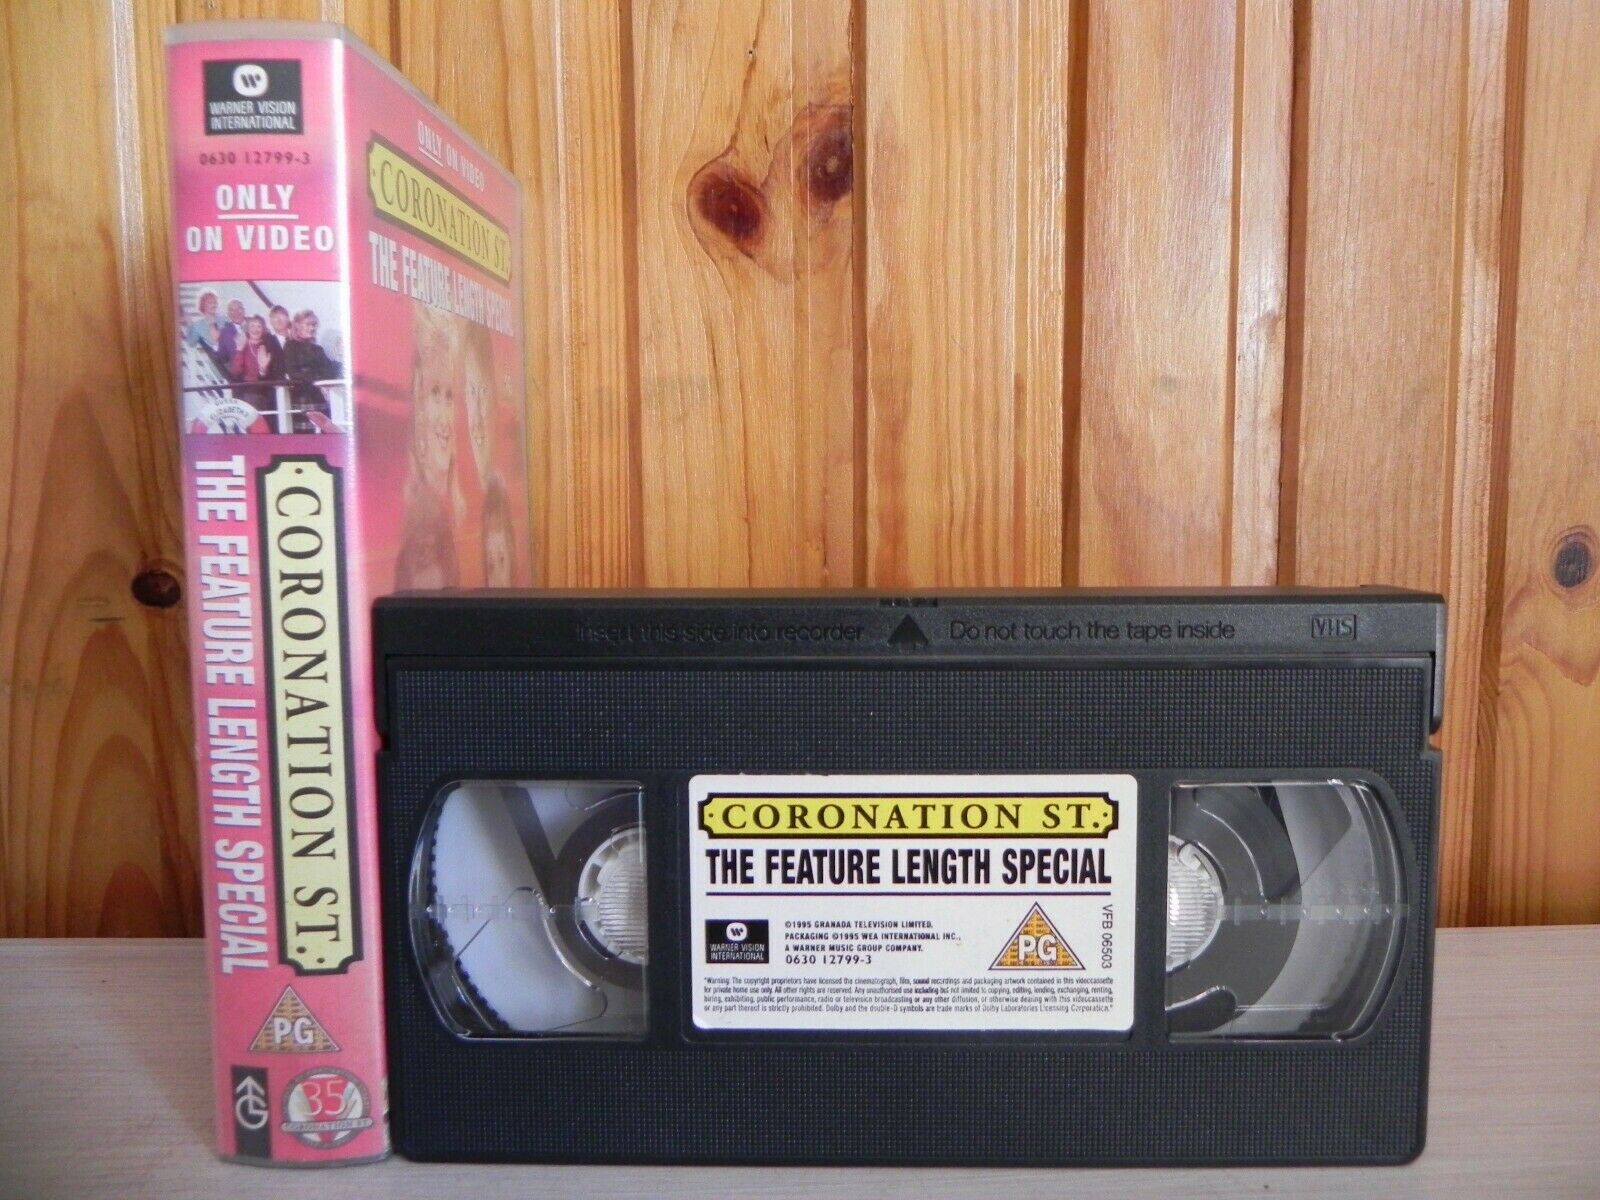 Coronation Street: The Feature Lenght Special [Includes Making Of] TV Series - Pal VHS-